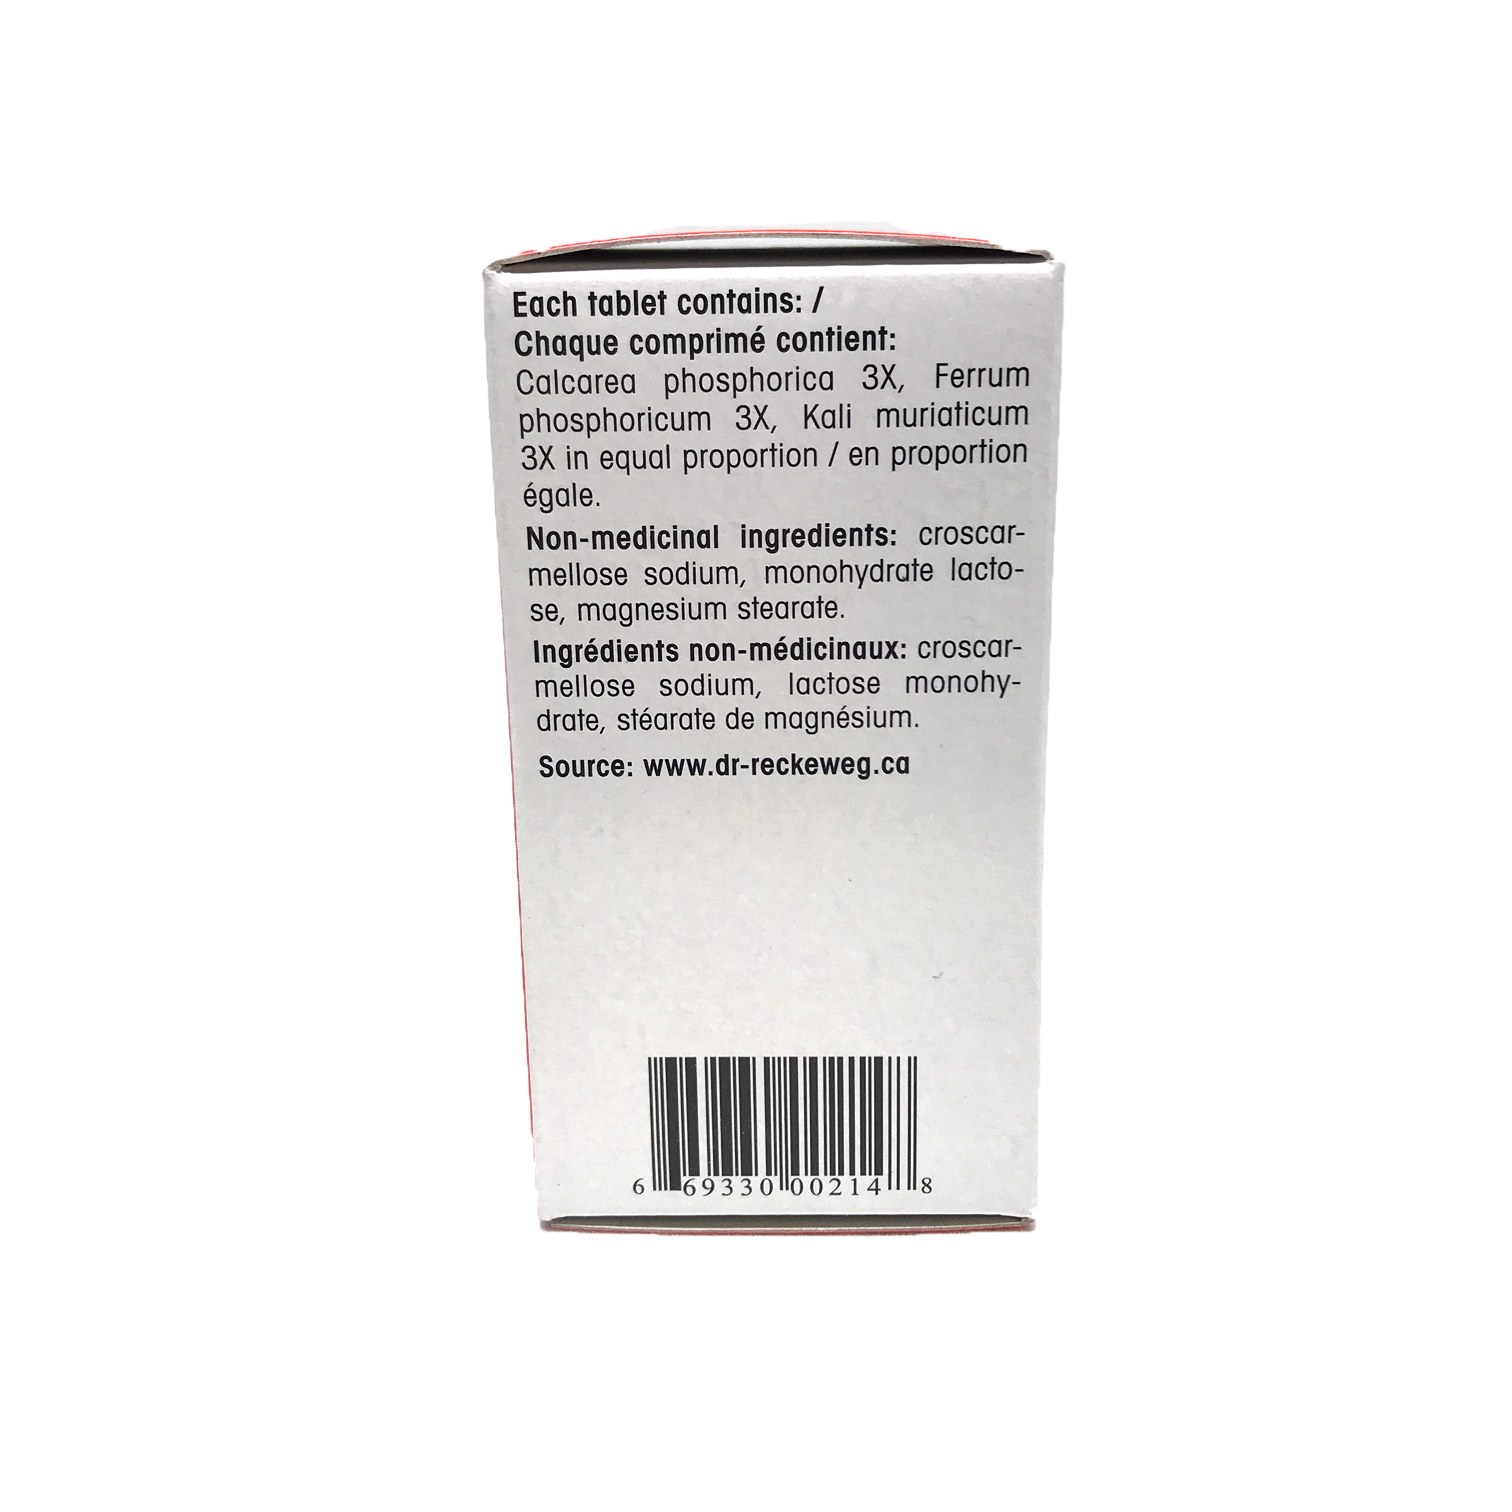 Dr. Reckeweg BC-10 200 Tablets 20g